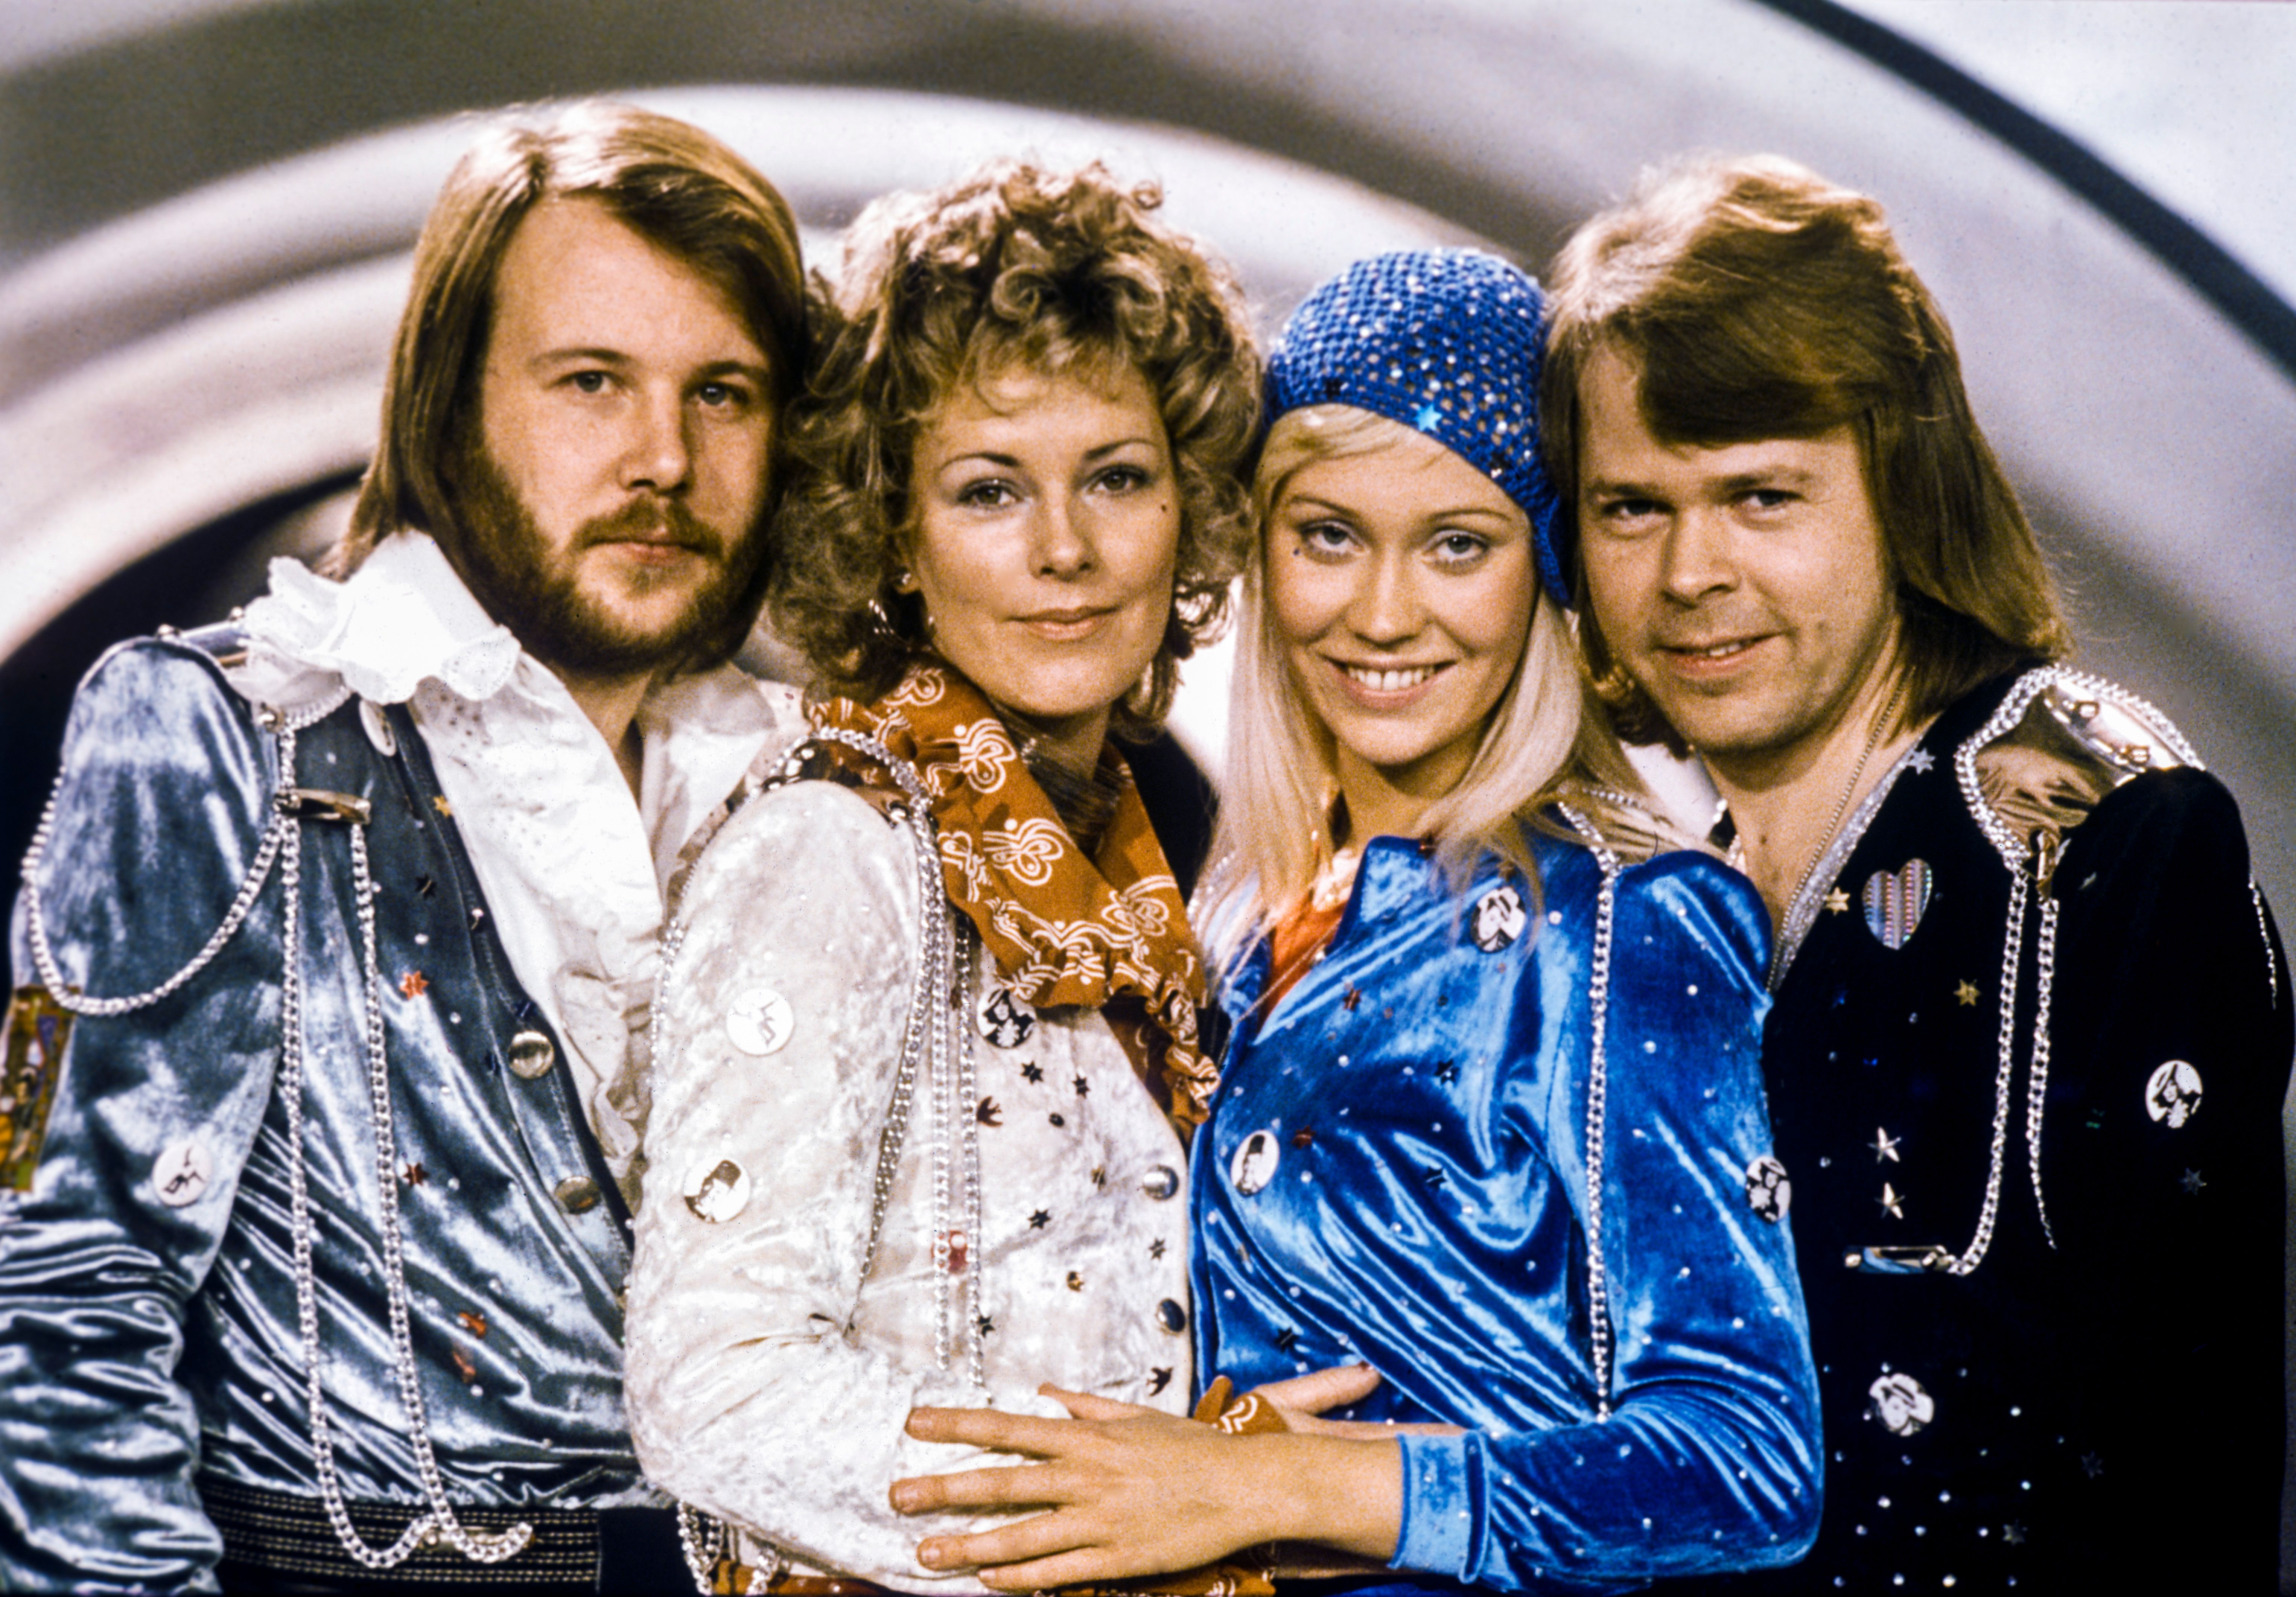 Picture taken in 1974 in Stockholm shows the Swedish pop group Abba with its members (L-R) Benny Andersson, Anni-Frid Lyngstad, Agnetha Faltskog and Bjorn Ulvaeus.